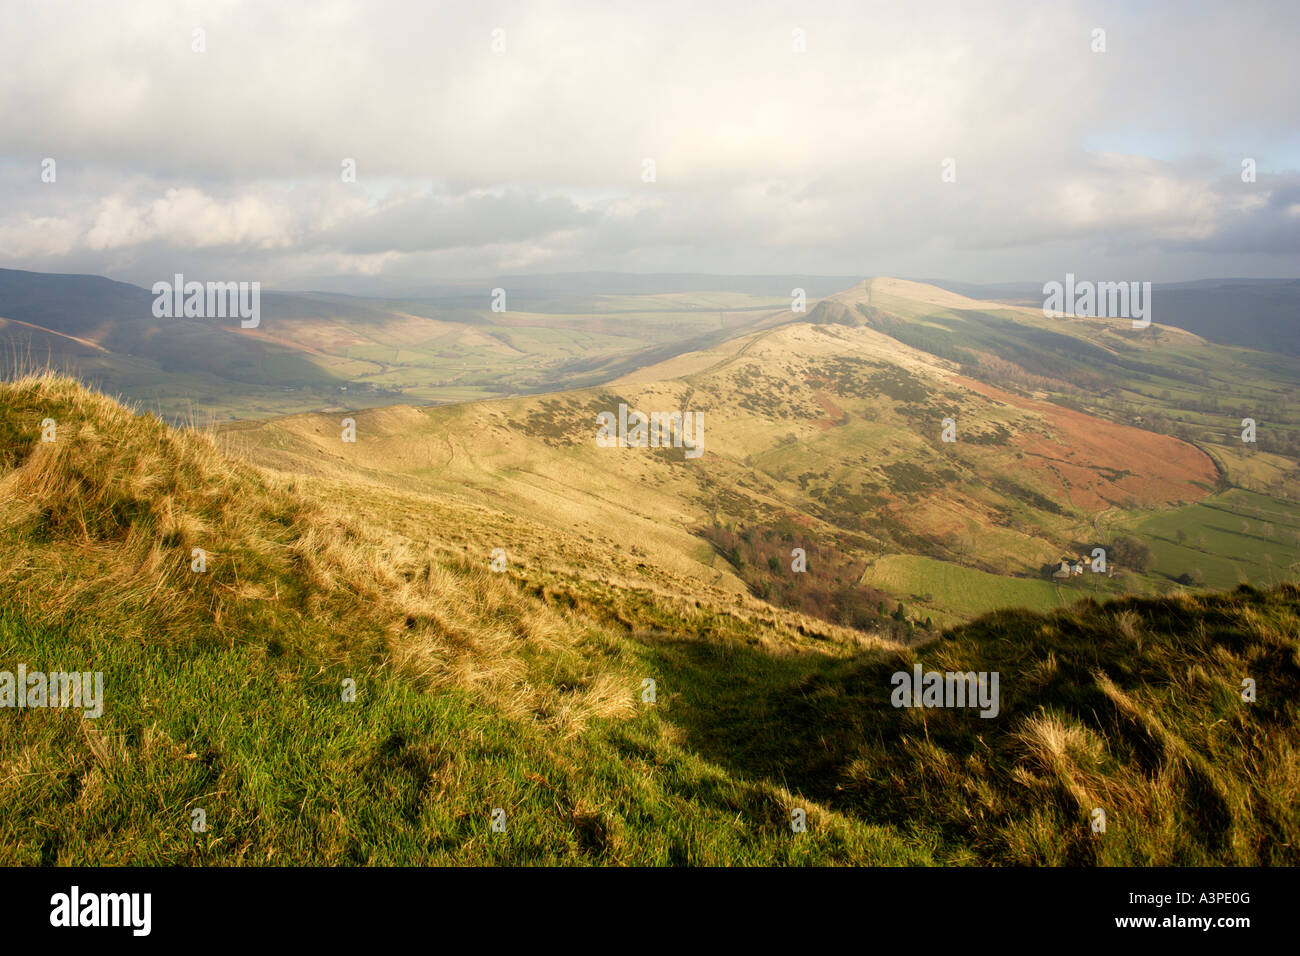 View from Mam Tor looking along the Great Ridge towards Hollins cross and Back Tor in the Peak district National Park Stock Photo